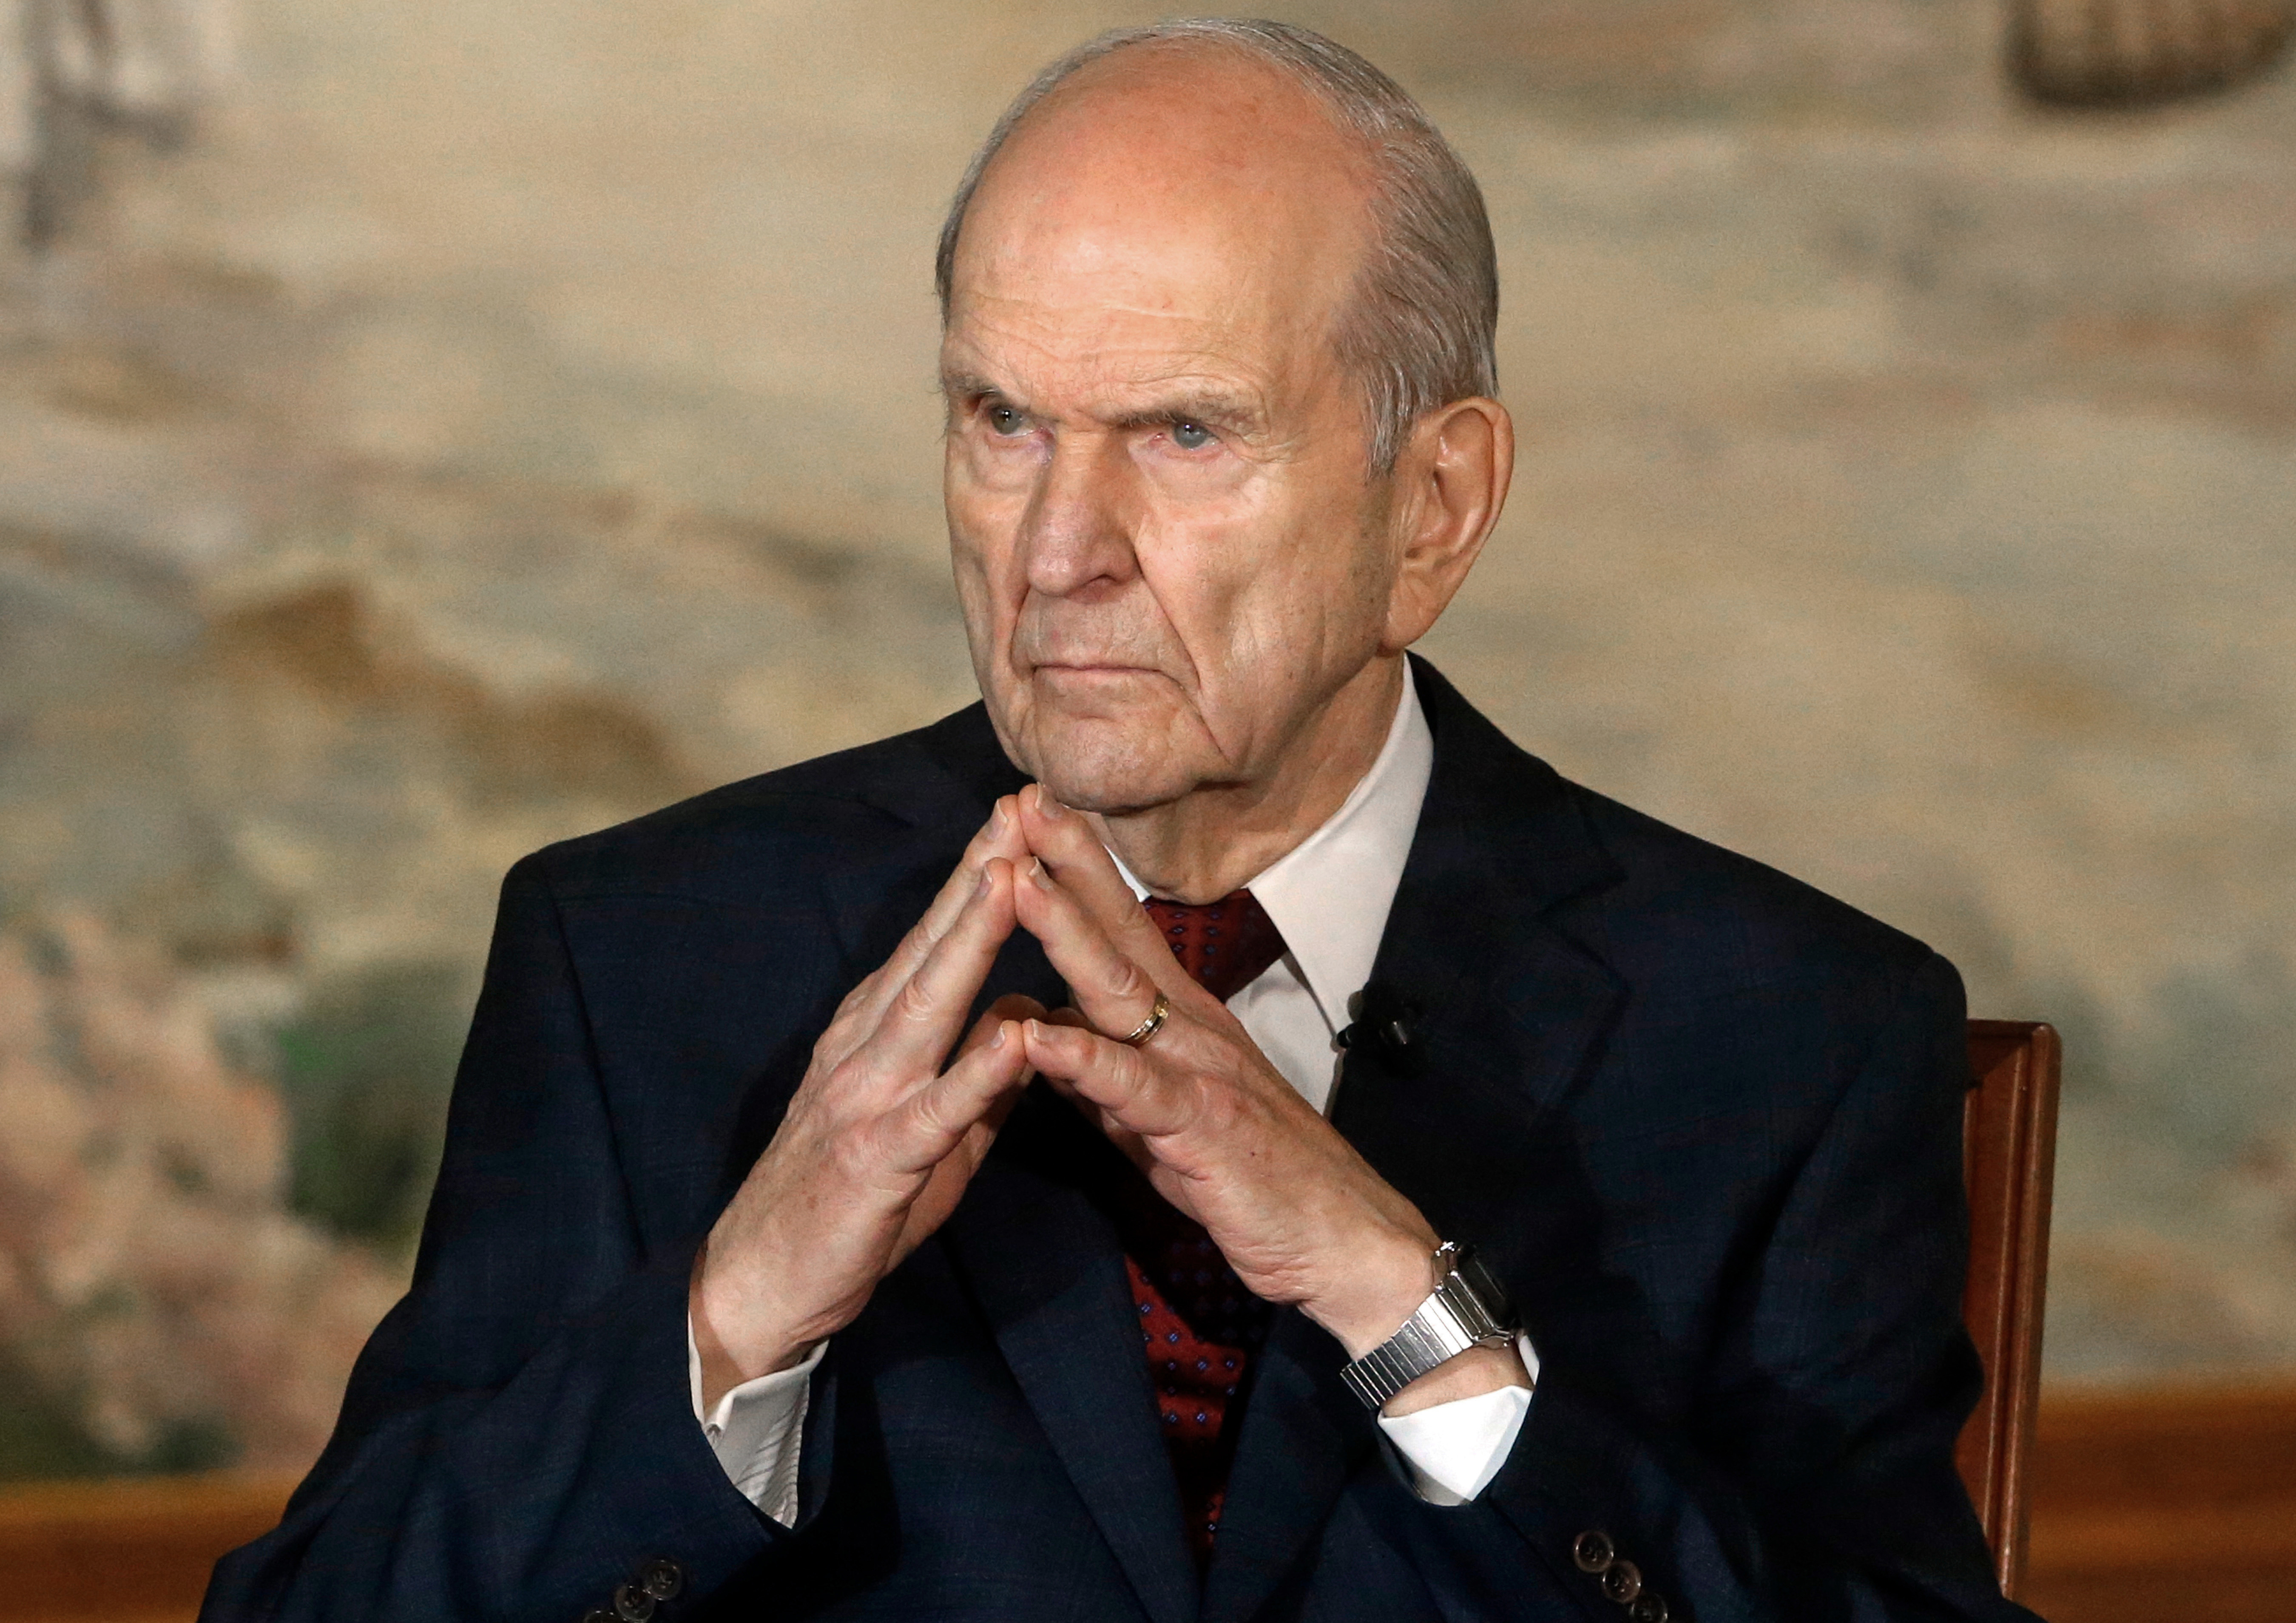 In this 2018 file photo, Church of Jesus Christ of Latter-day Saints President Russell M. Nelson looks on following a news conference, in Salt Lake City.